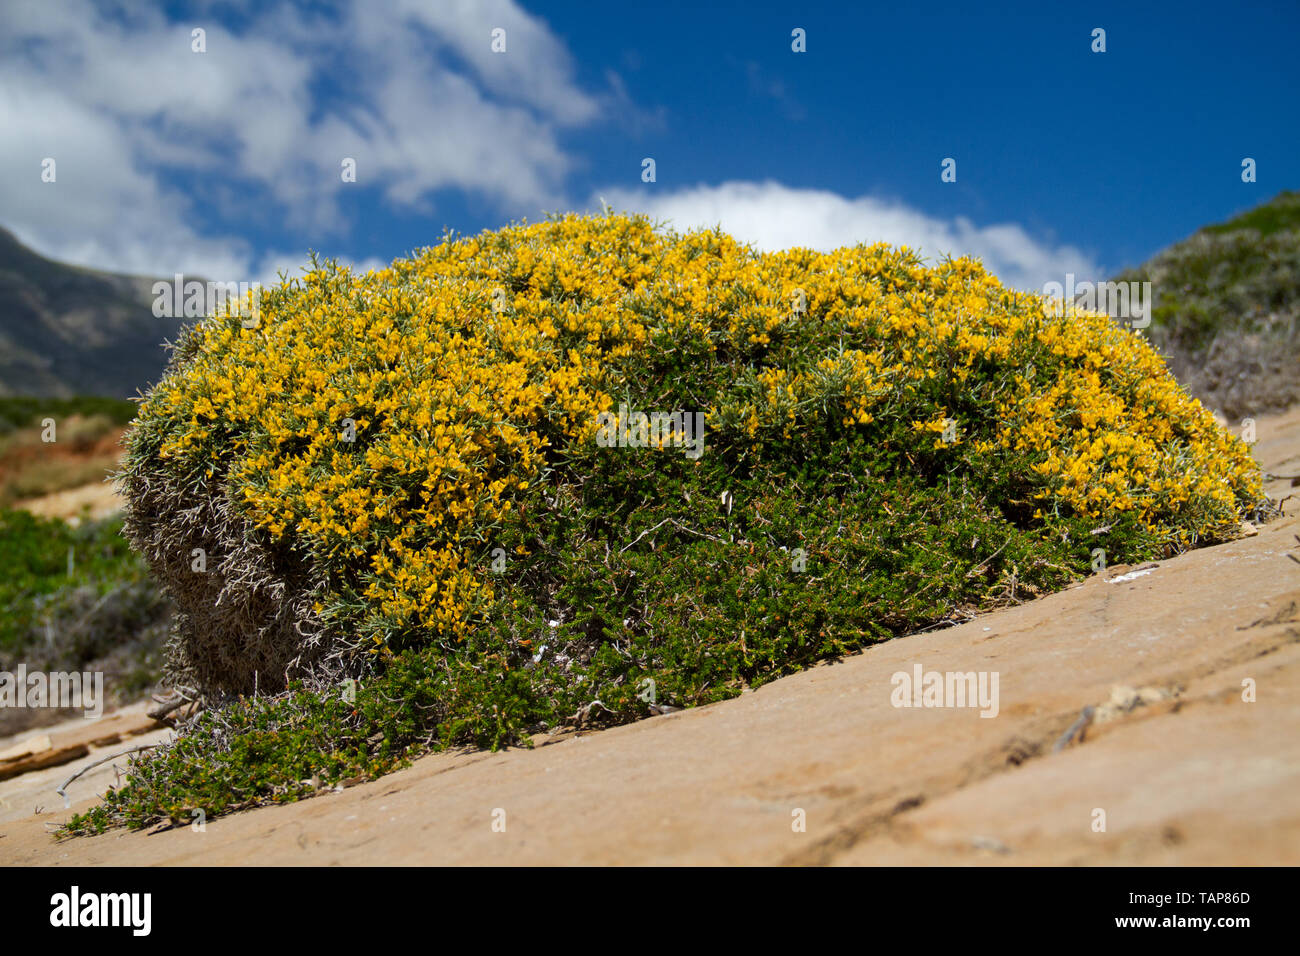 Prickly burnet or Sarcopoterium spinosum growing in a rocky environment under a blue sky Stock Photo